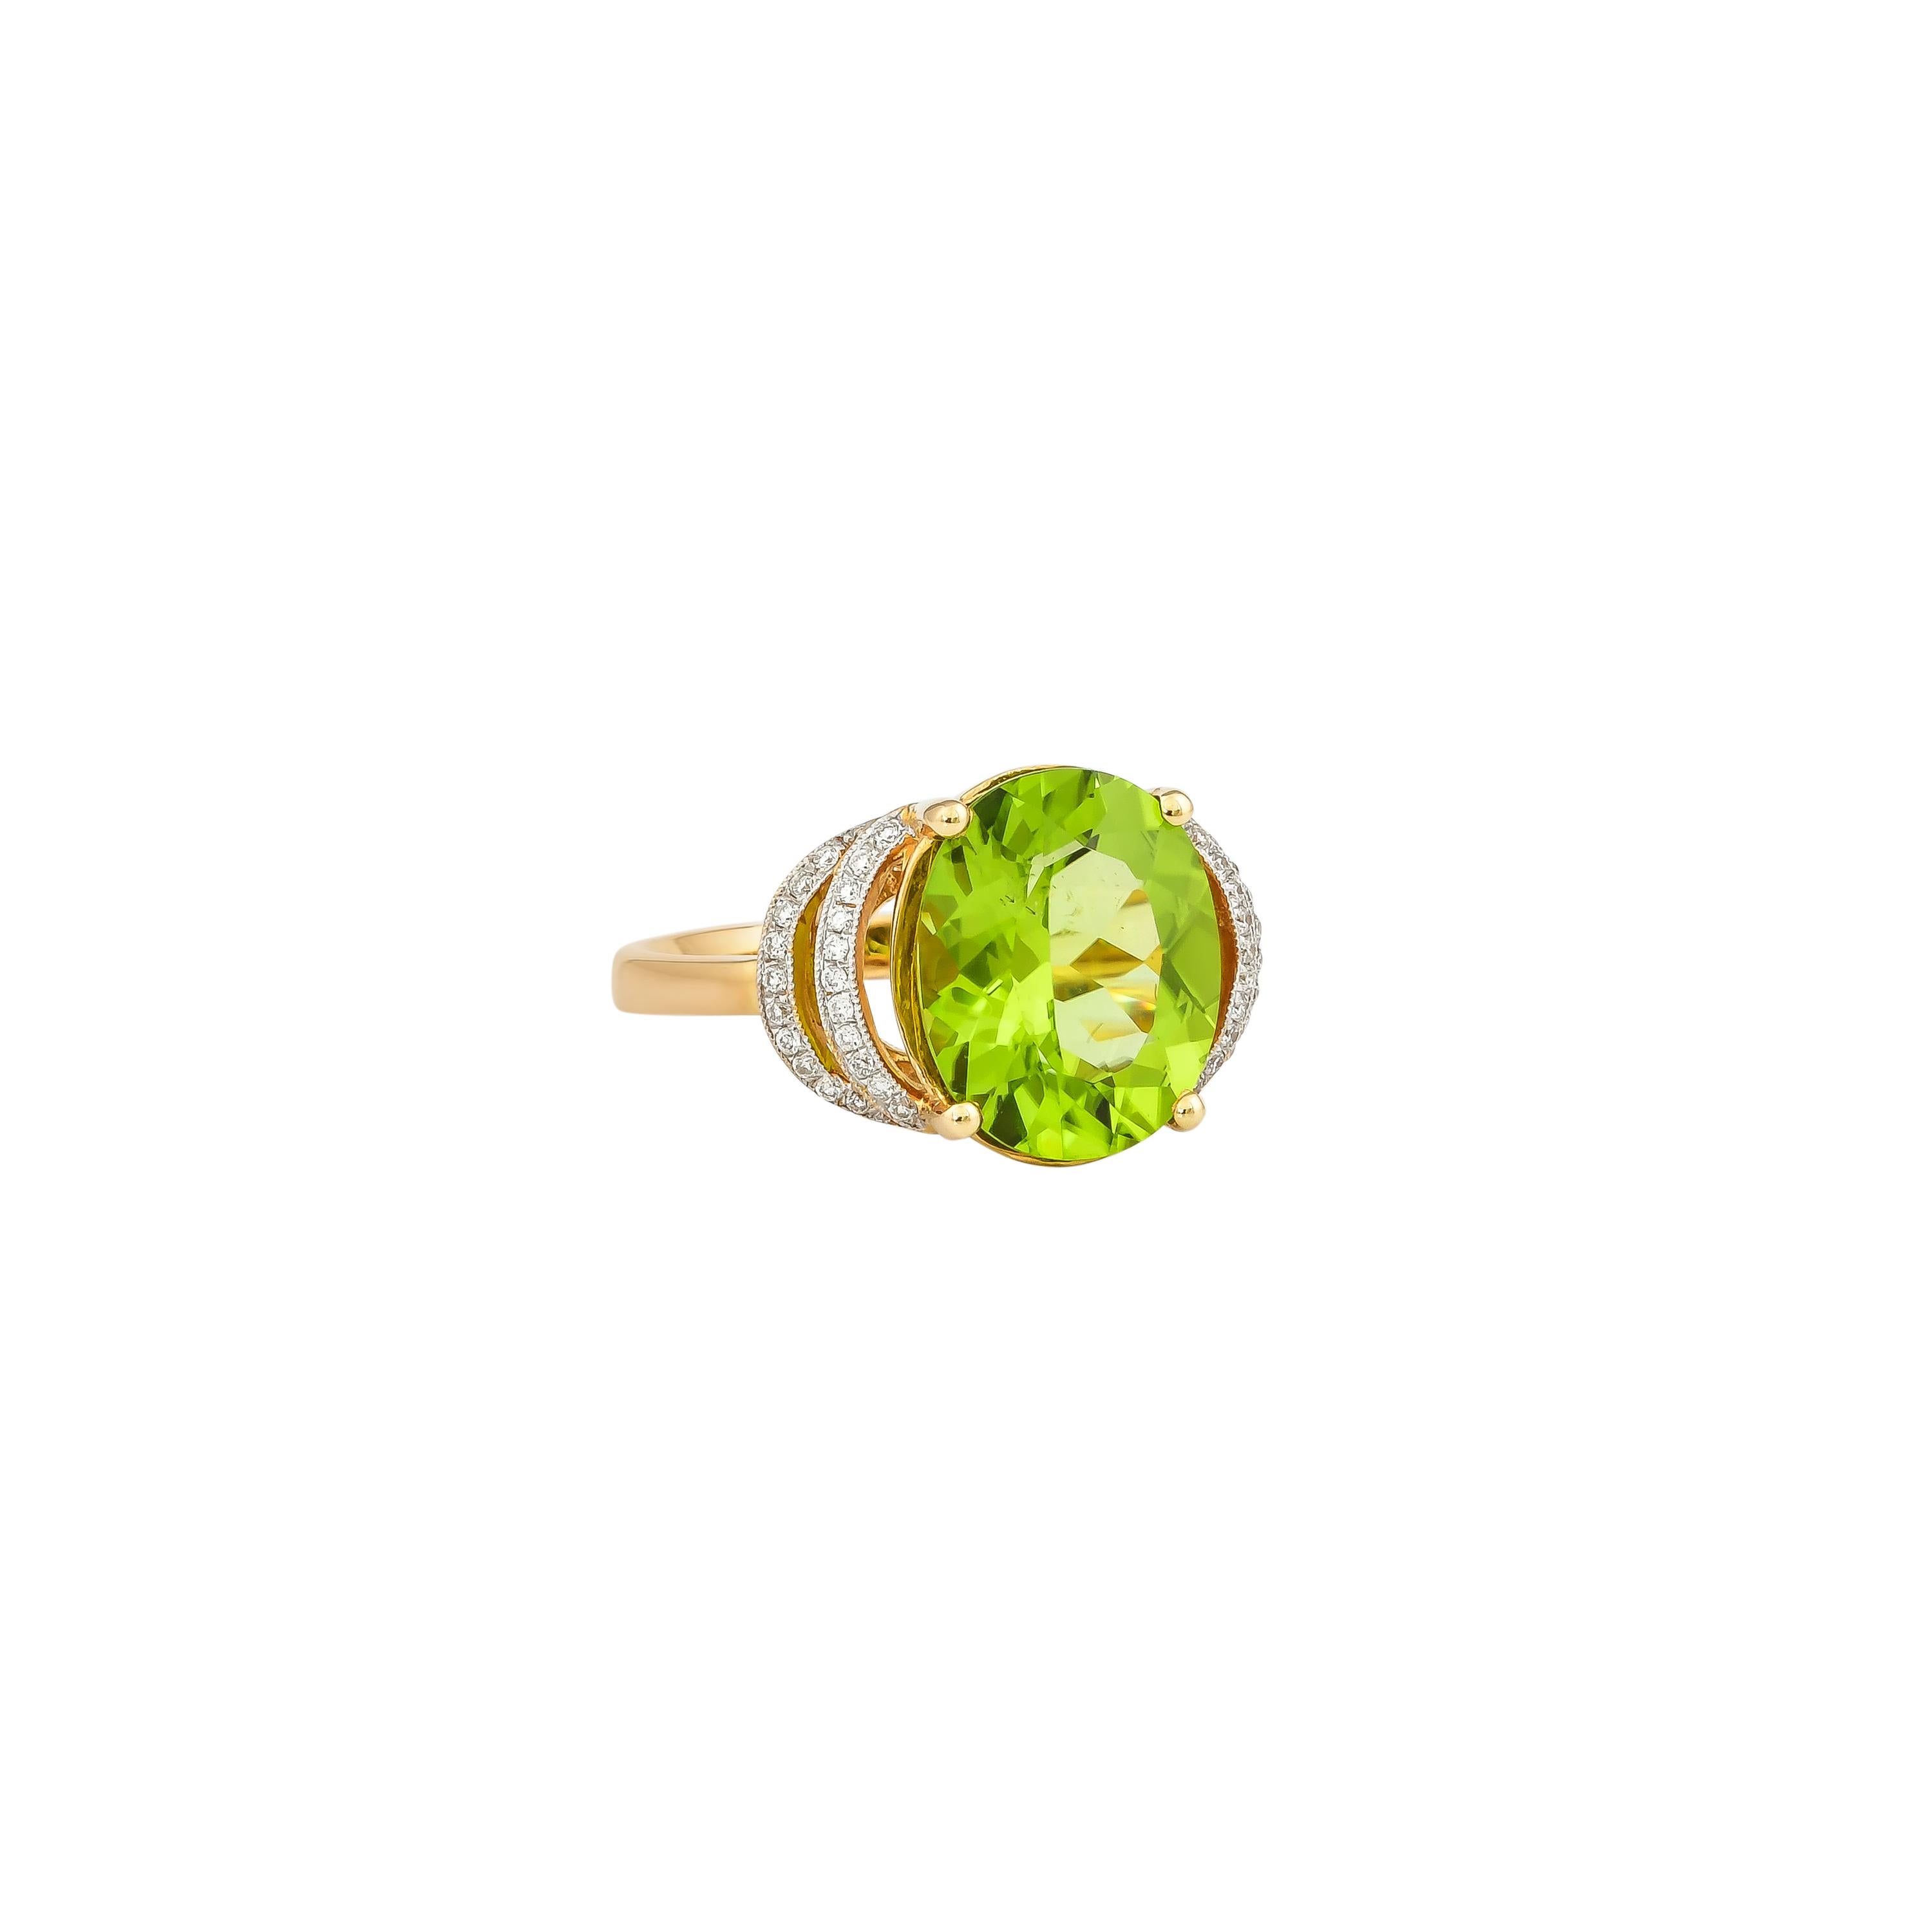 This collection features an array of pretty peridot rings! Accented with diamonds these rings are made in yellow gold and present a vibrant and fresh look. 

Classic peridot ring in 18K yellow gold with diamonds. 

Peridot: 4.14 carat oval